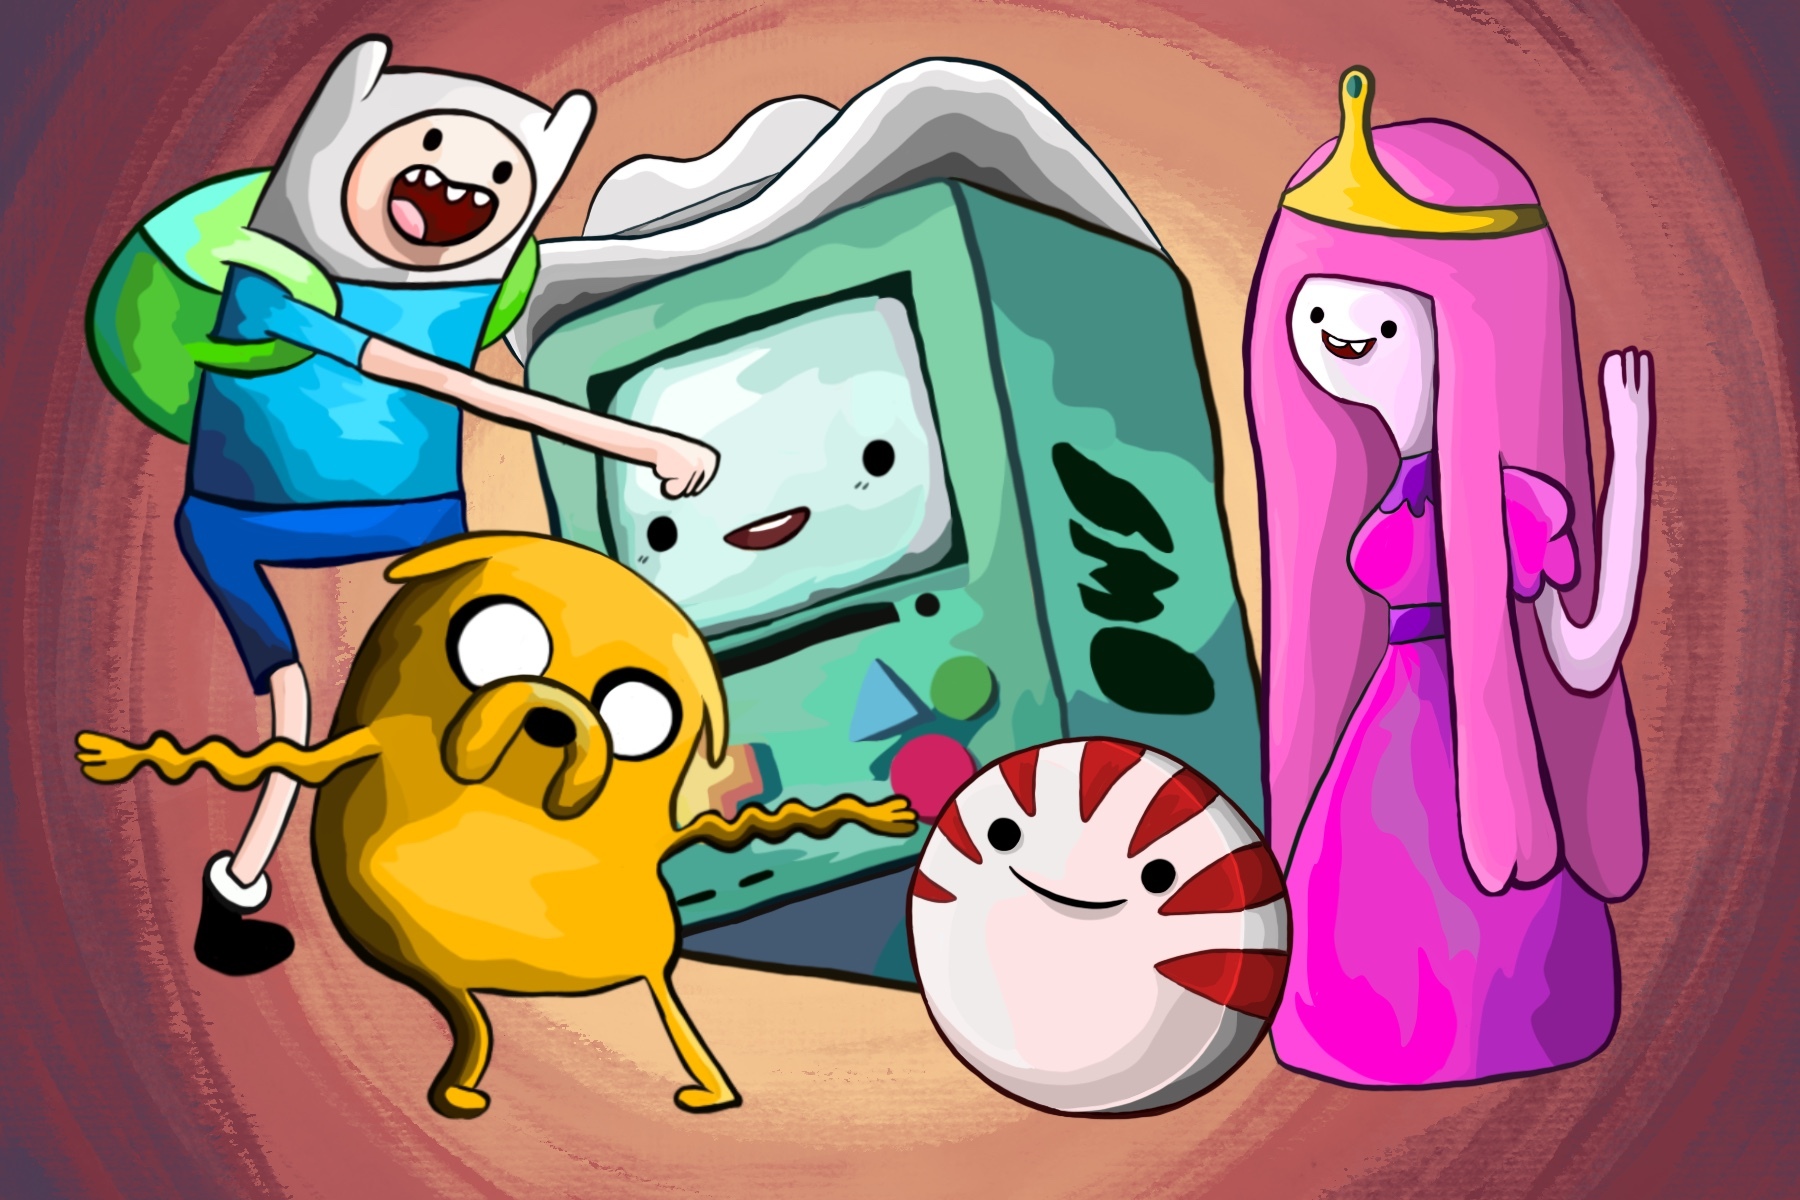 Illustration by Shelly Freund of the Adventure Time cast